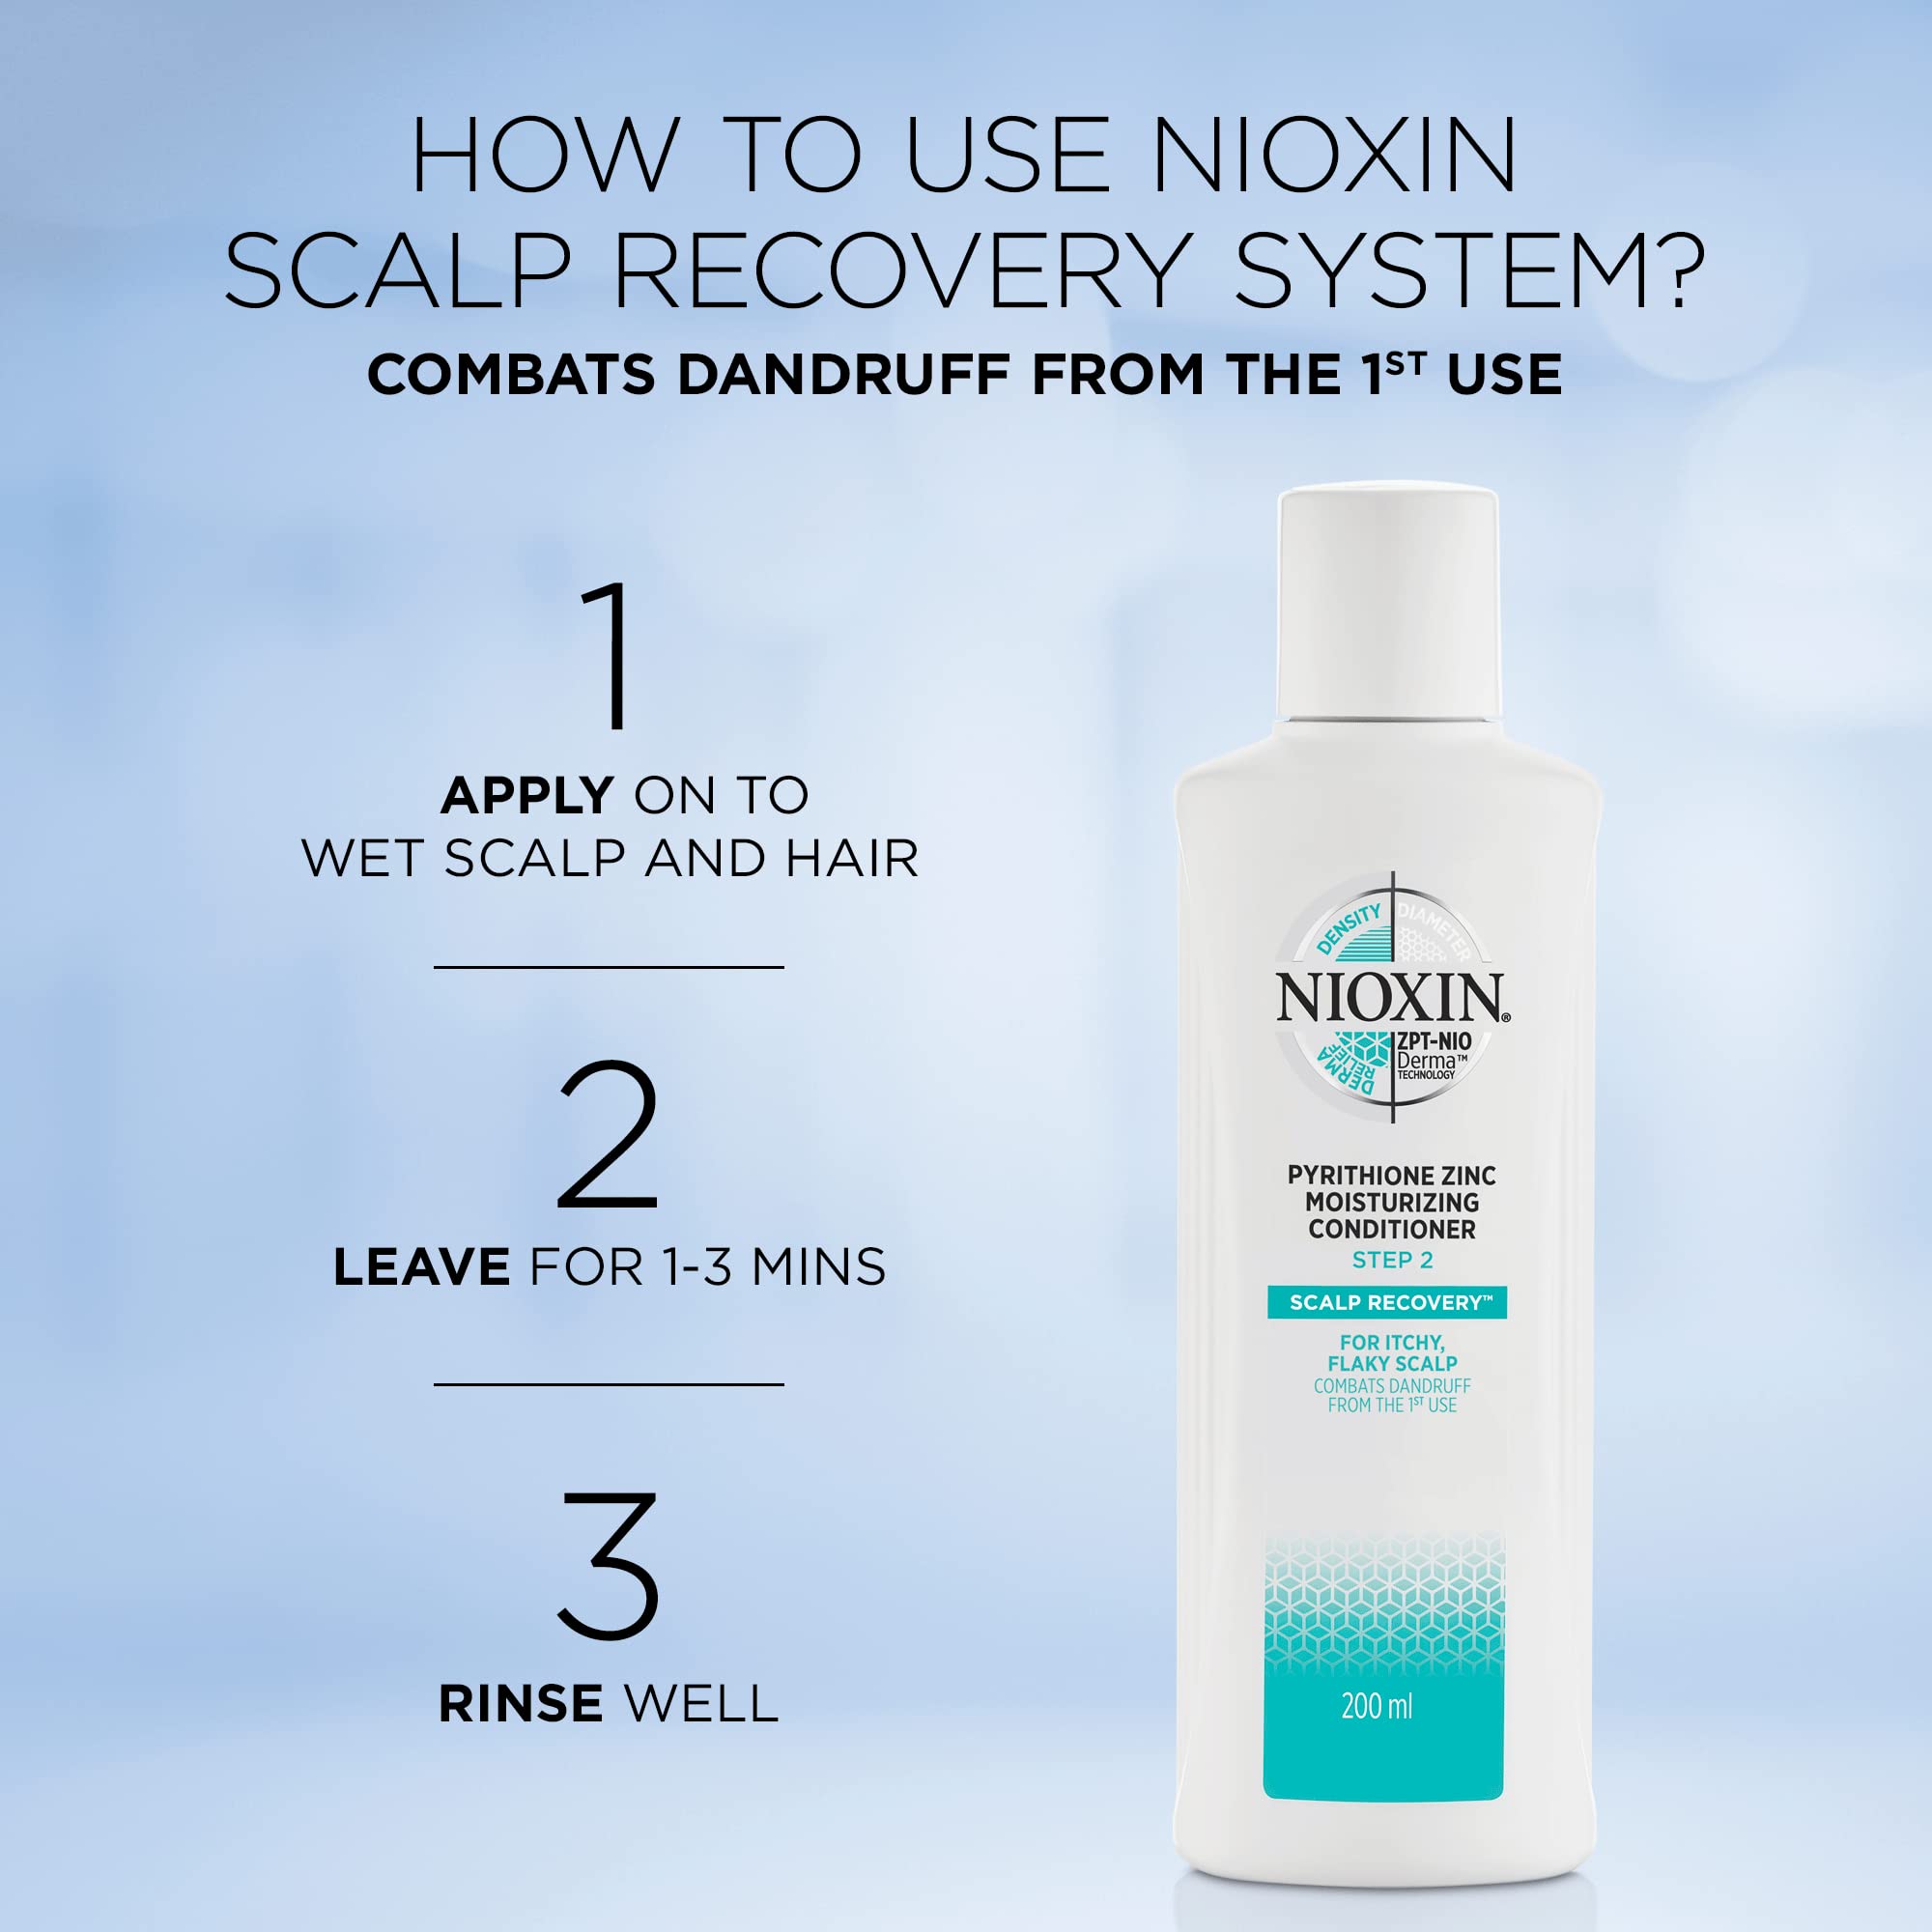 Nioxin Scalp Recovery Step 2 Moisturizing Conditioner for Itchy, Flaky Scalp, Anti-Dandruff Conditioner with Pyrithione Zinc, 33.8 oz